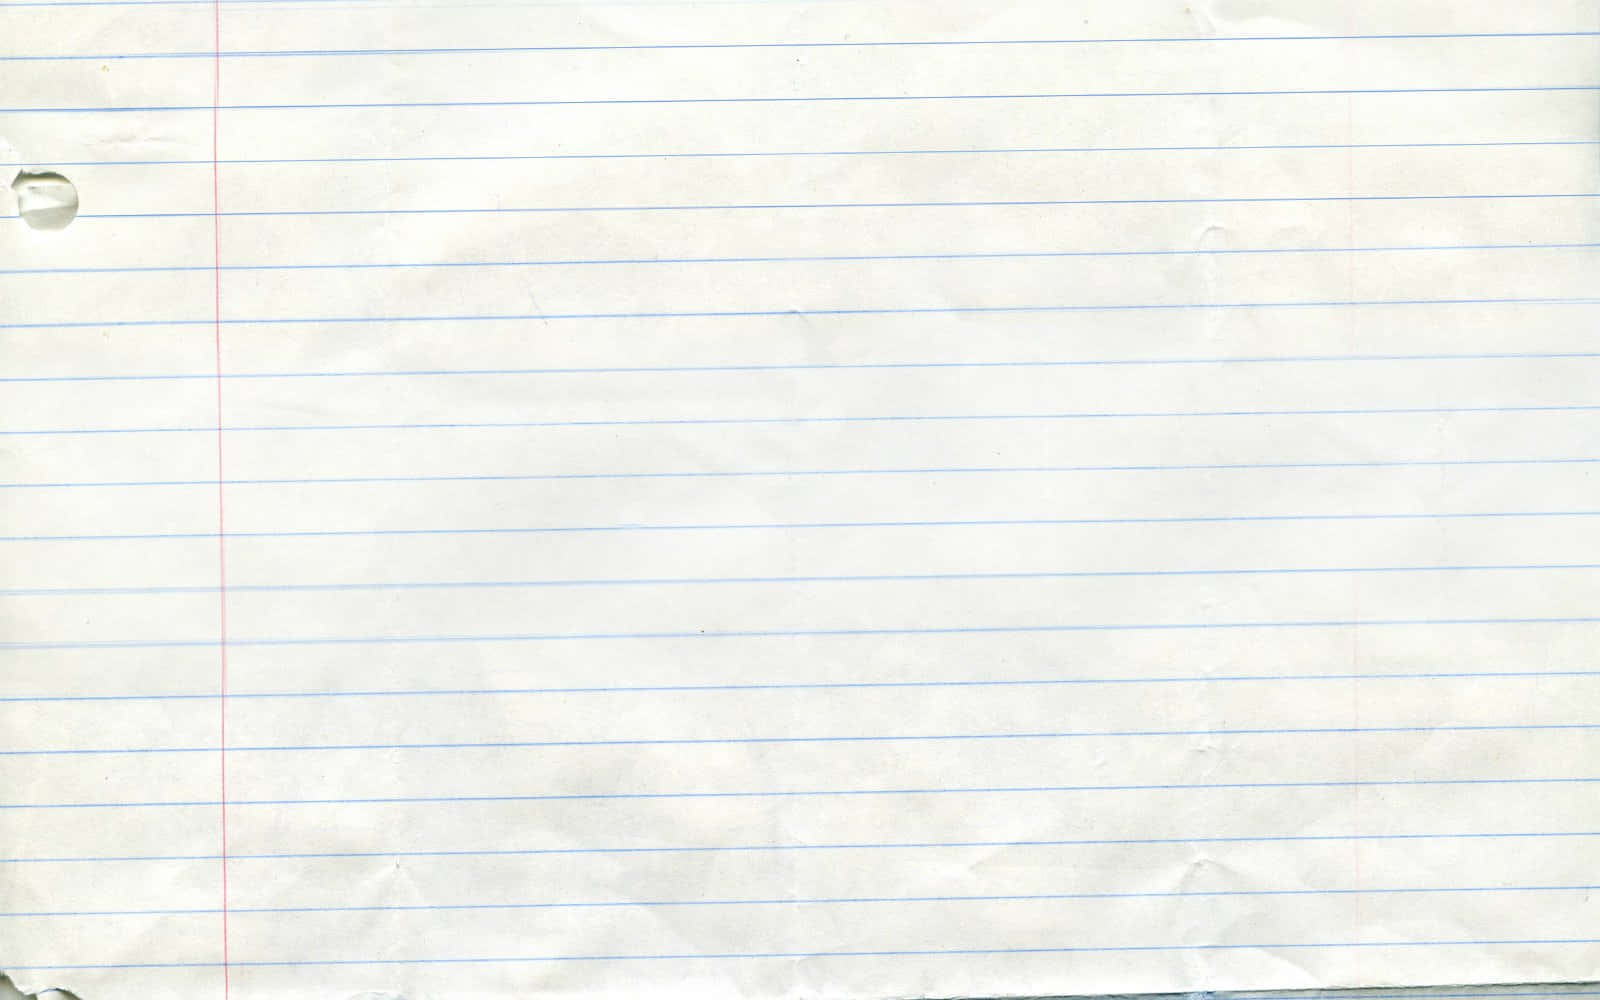 Blank Lined Paper Texture